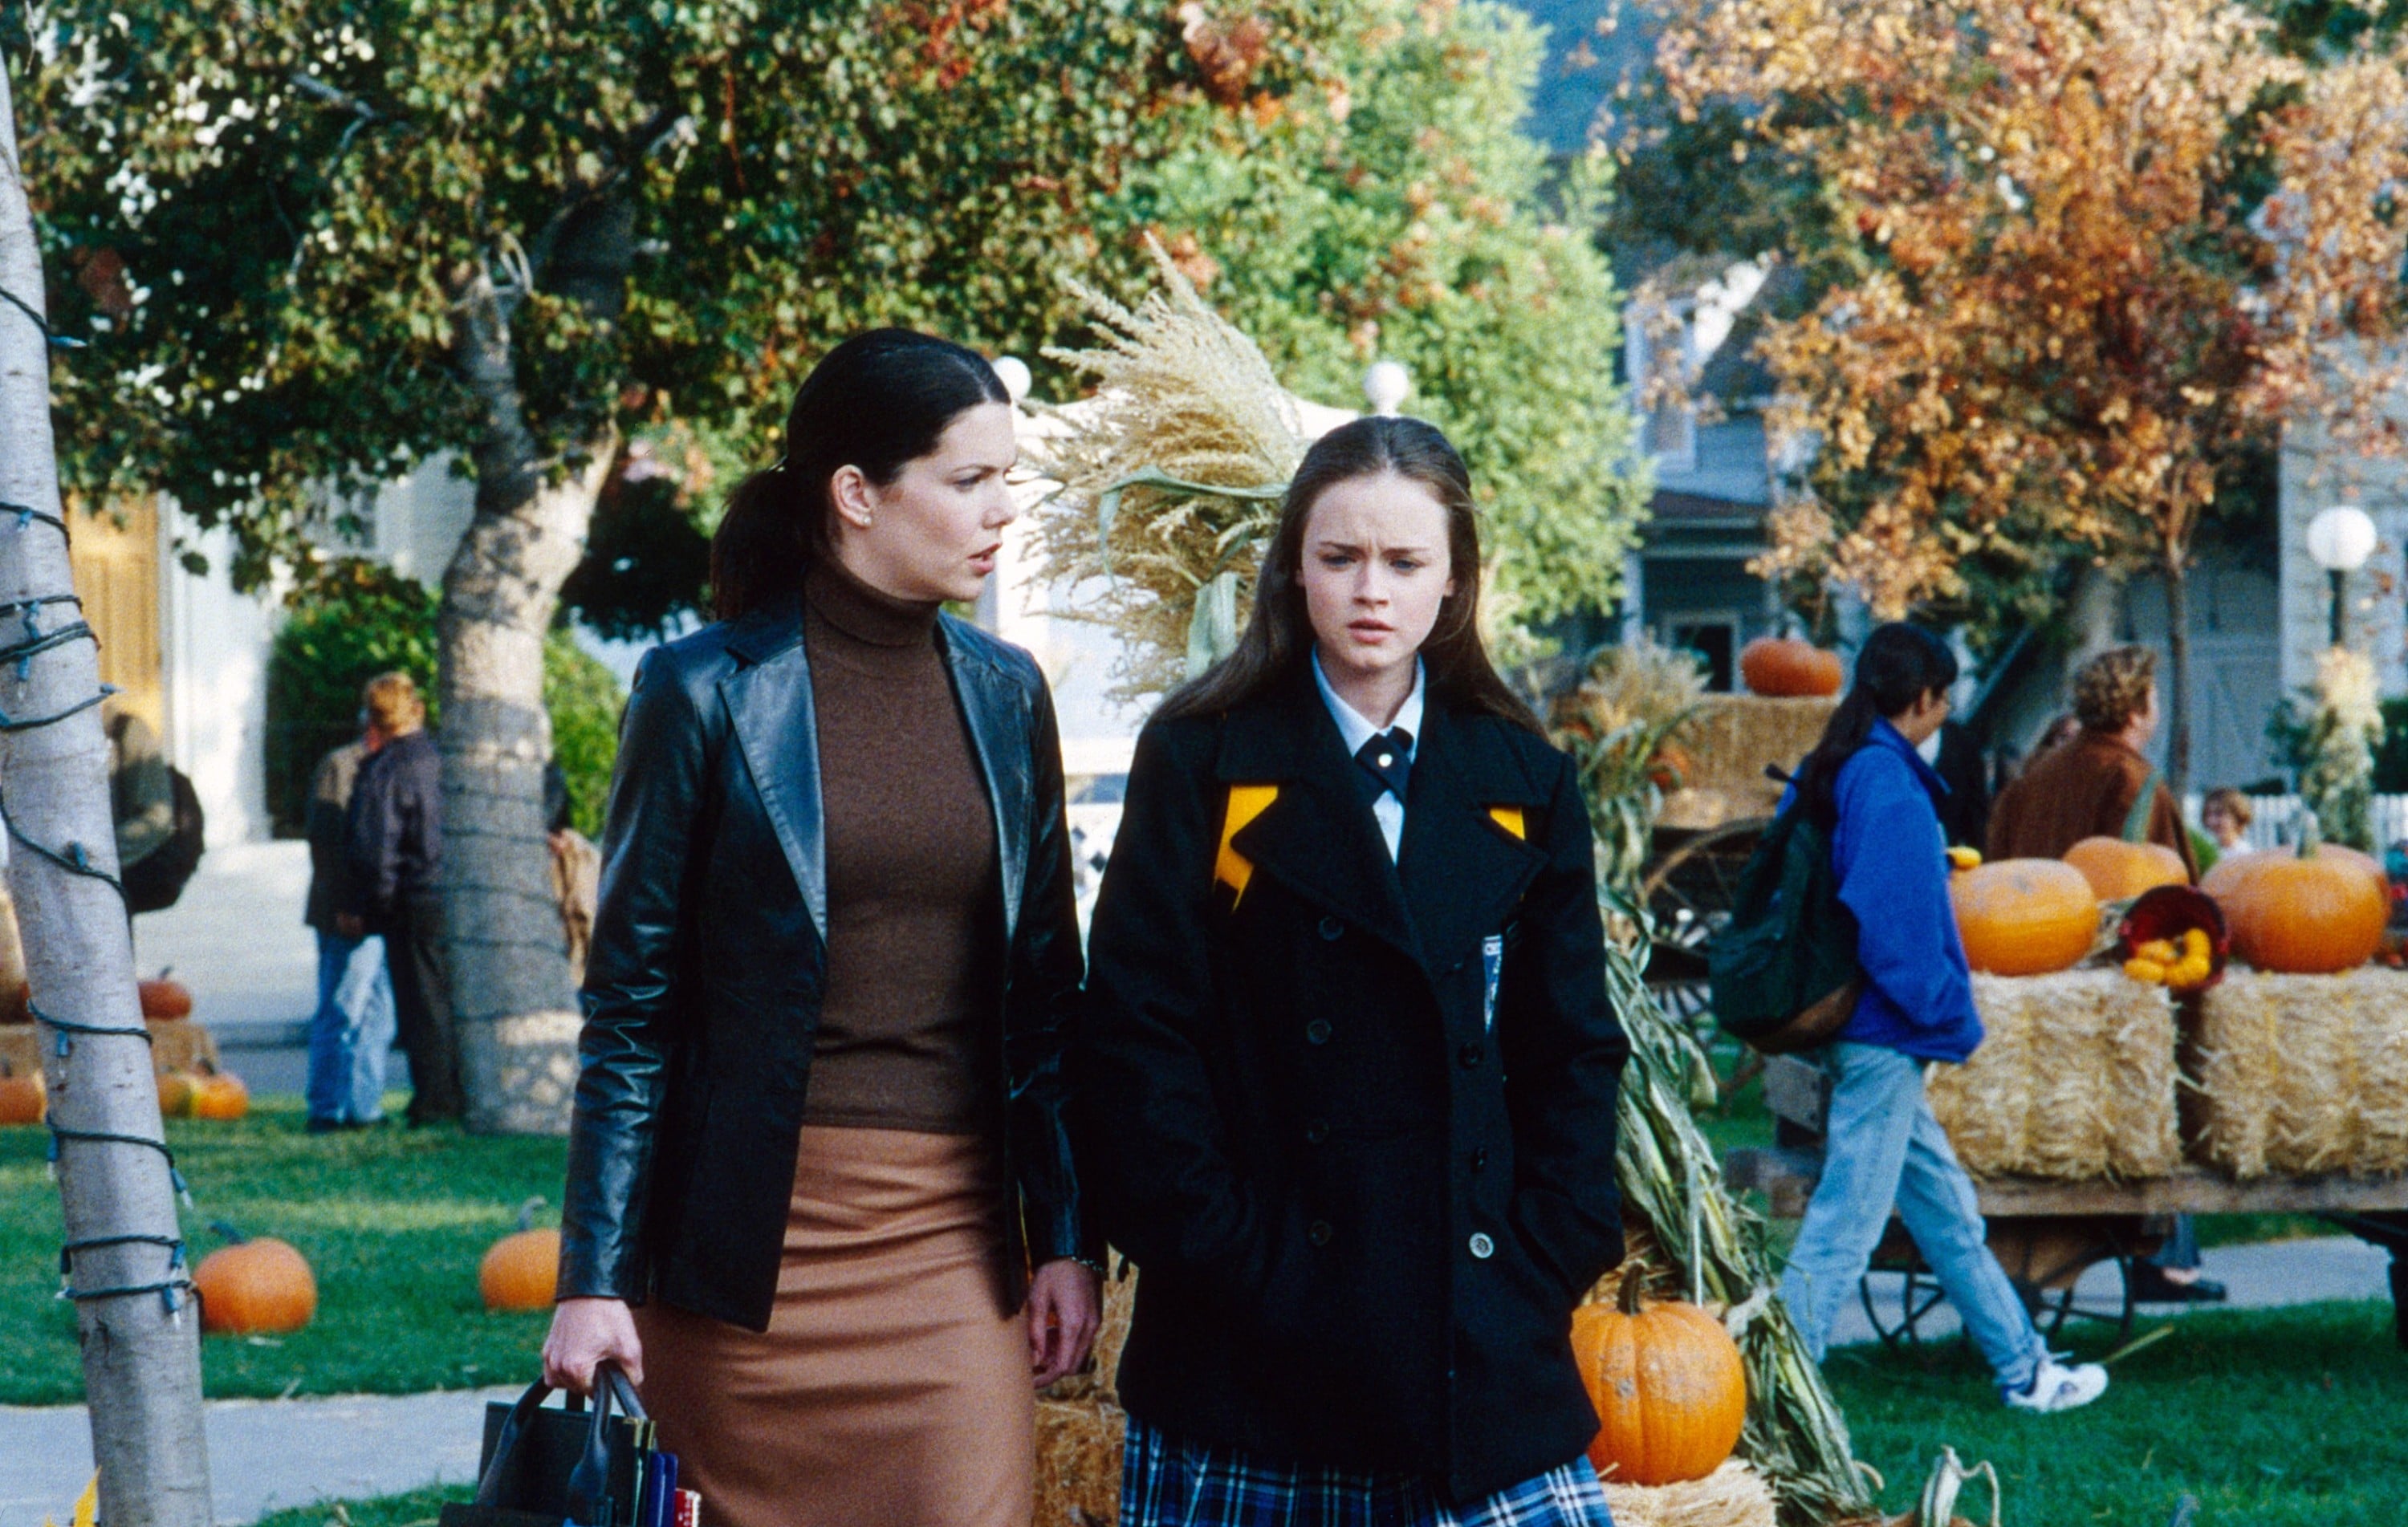 45 Best Thanksgiving Movies 2023 - Family Films to Watch on Turkey Day